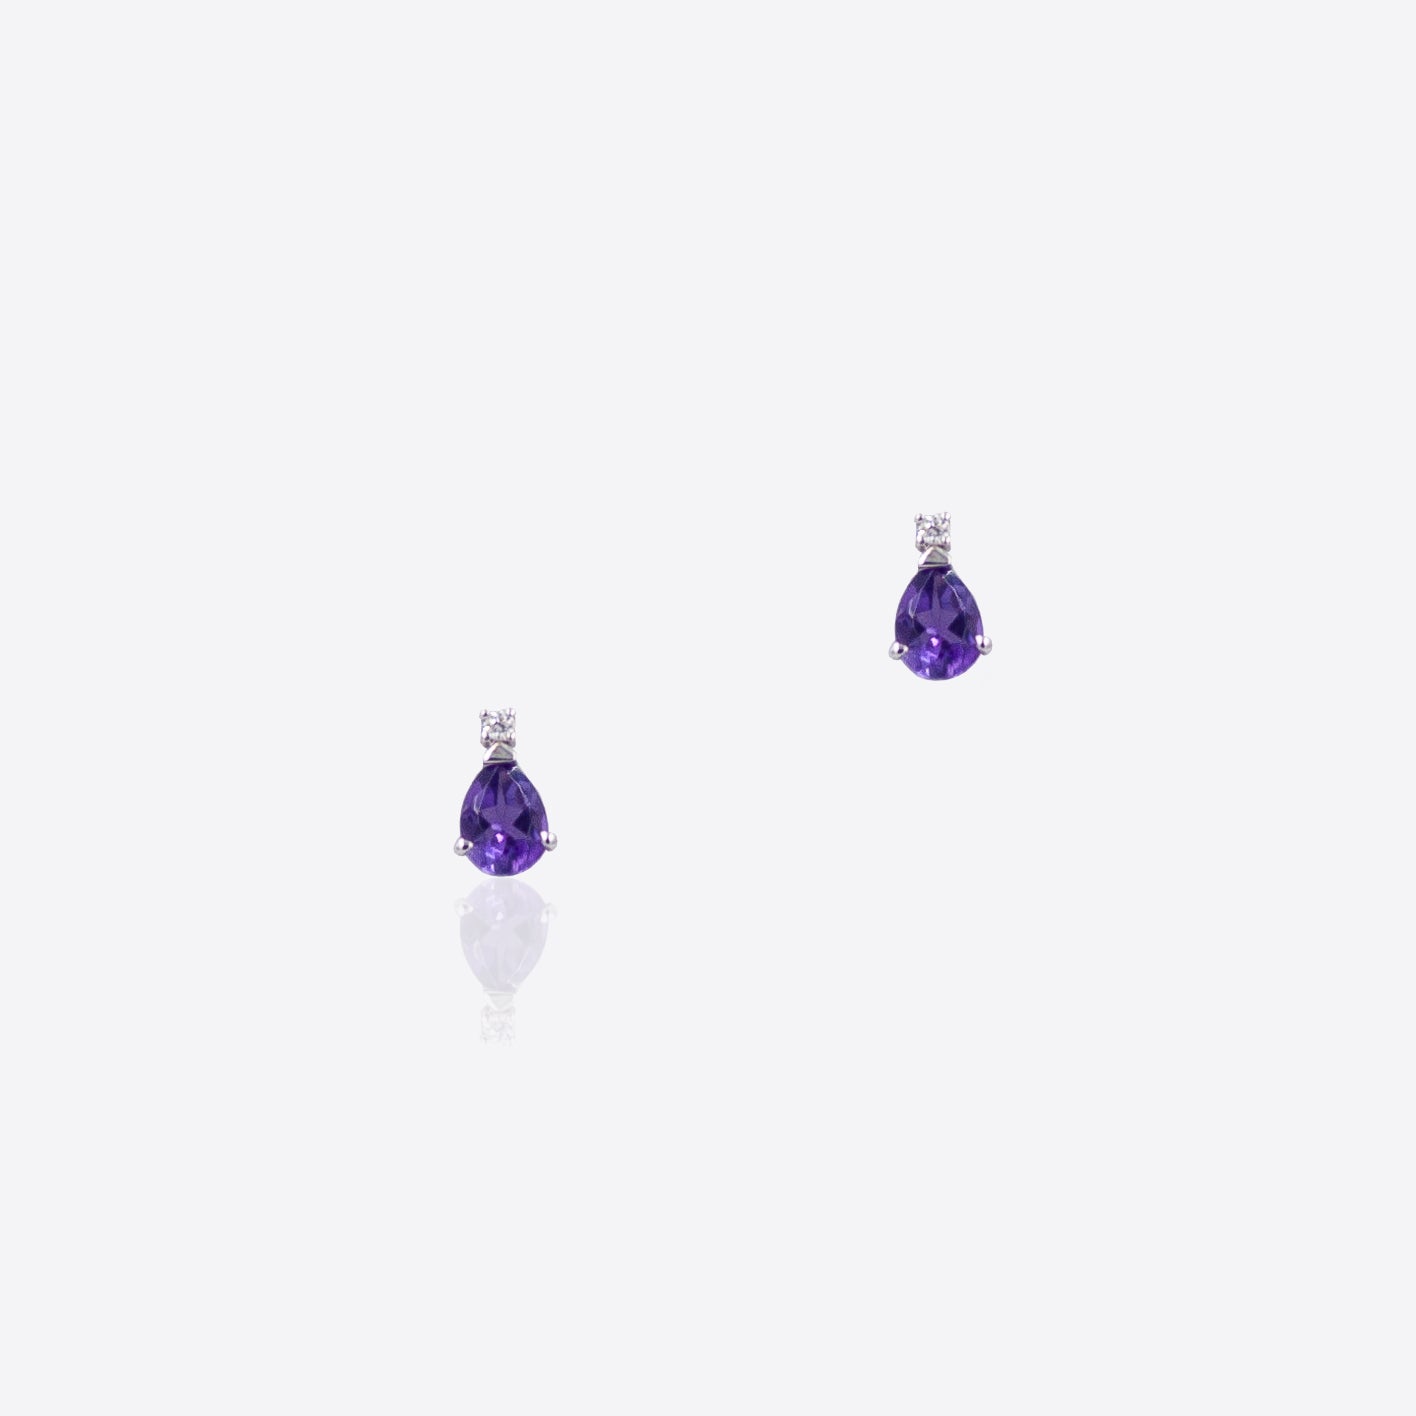 Droplet earrings with Diamonds and Amethyst